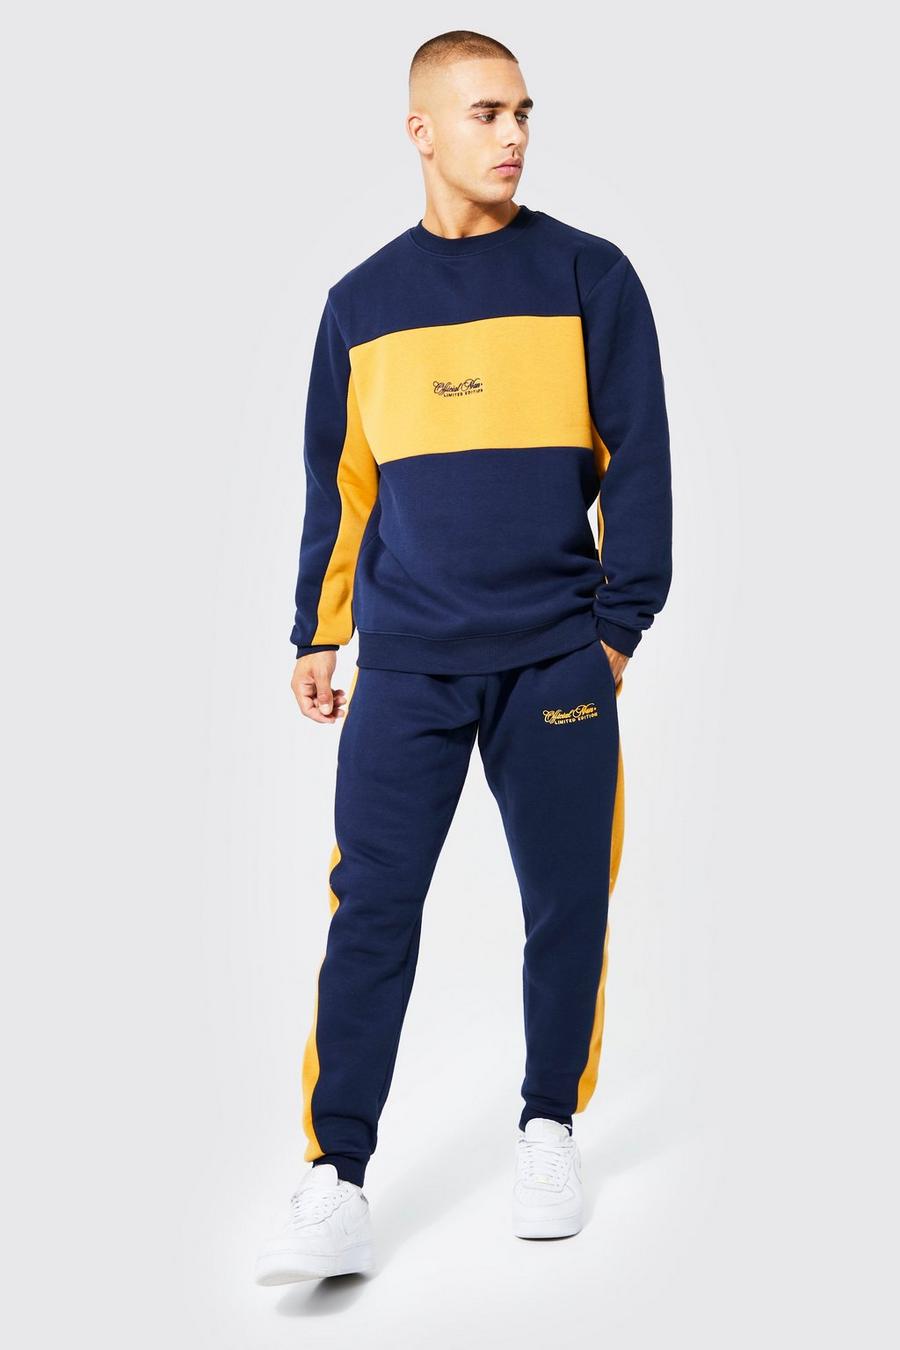 Navy blu oltremare Official Man Colour Block Sweater Tracksuit